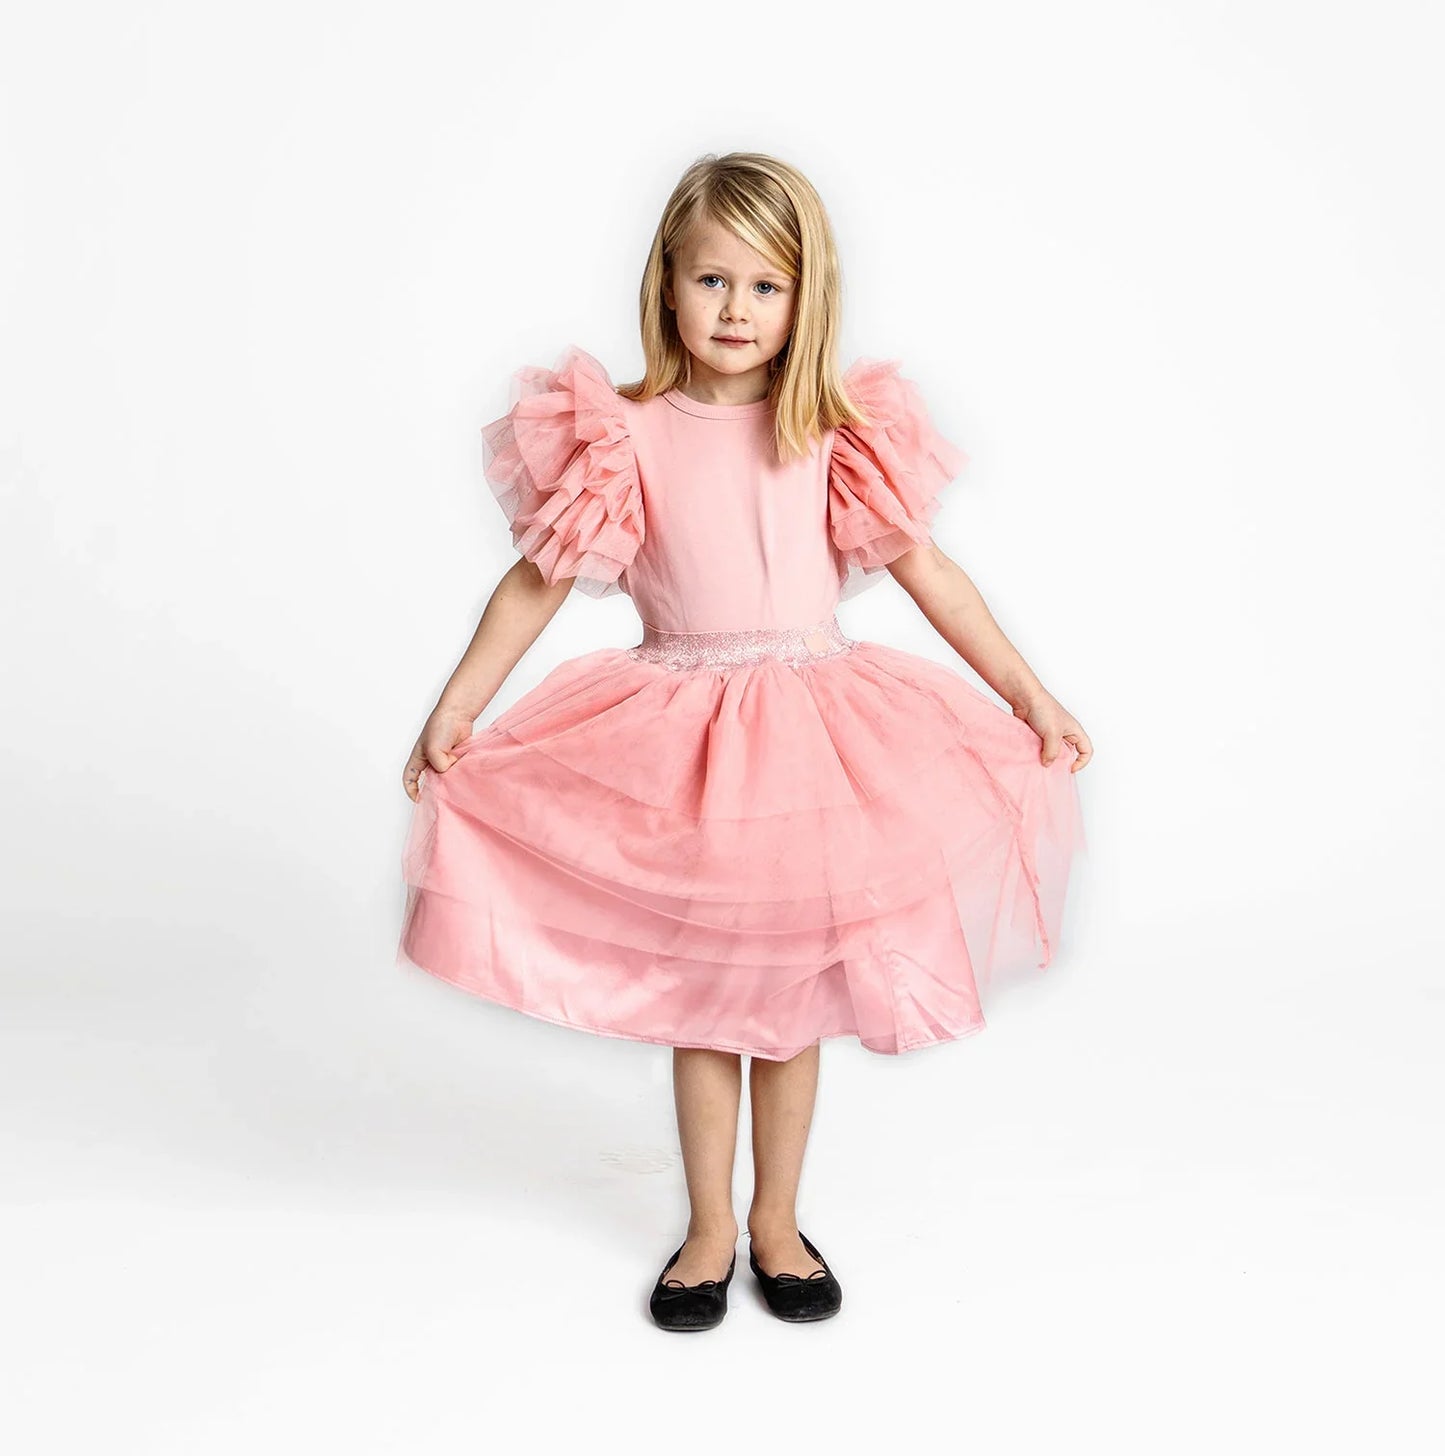 Tiny Wings Top & Skirt - Pink